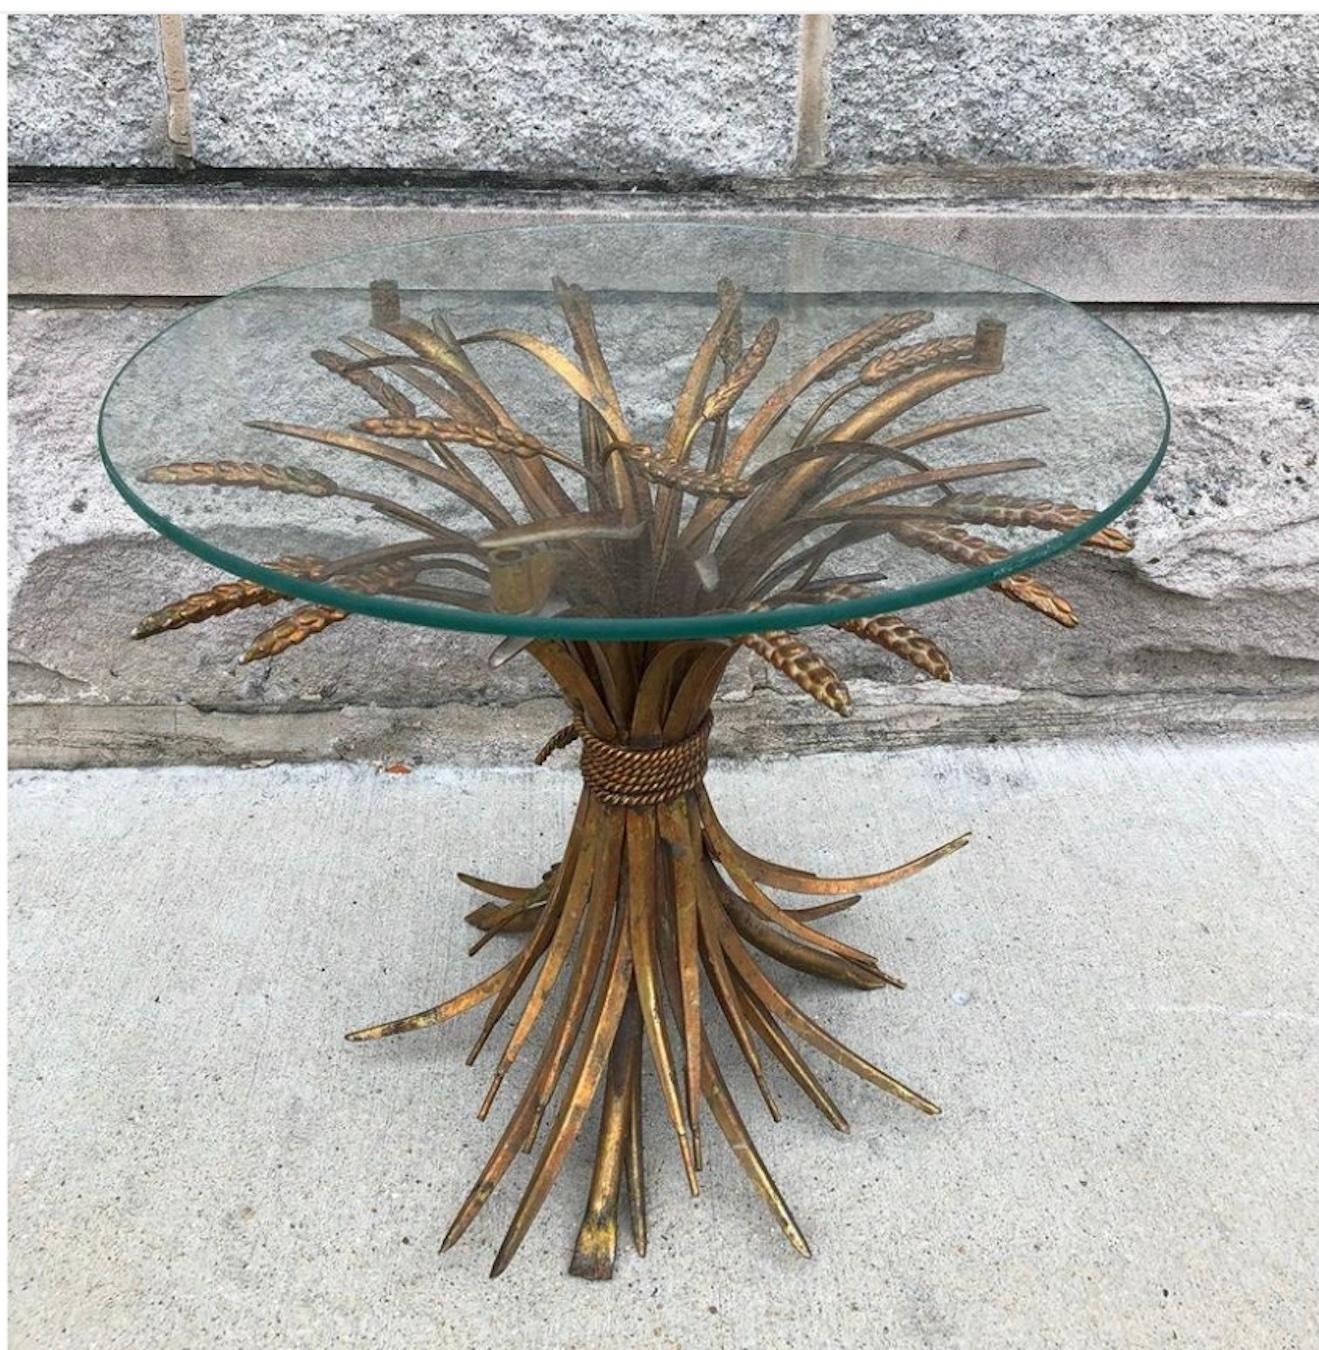 Gold Leaf Classic Italian Wheat Sheath Table As Seen In Coco Chanels Apartment. For Sale